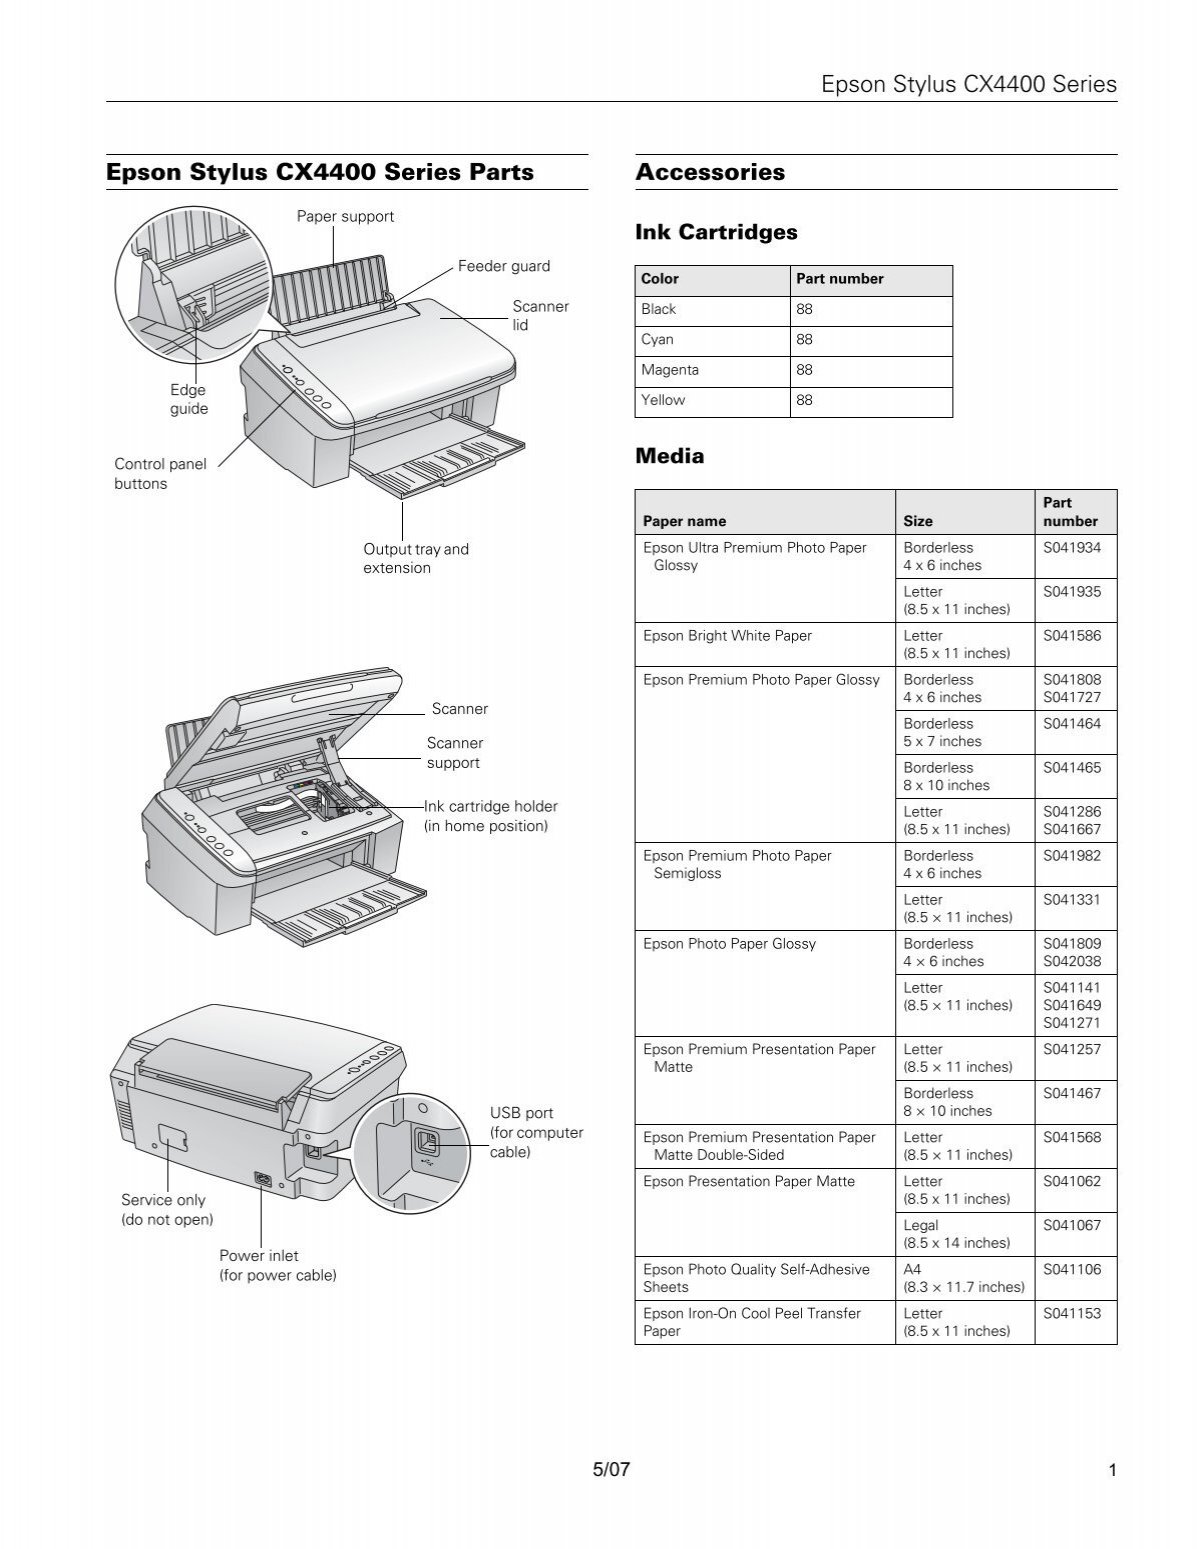 Epson Epson Stylus Cx4400 All In One Printer Product Information Guide 1447